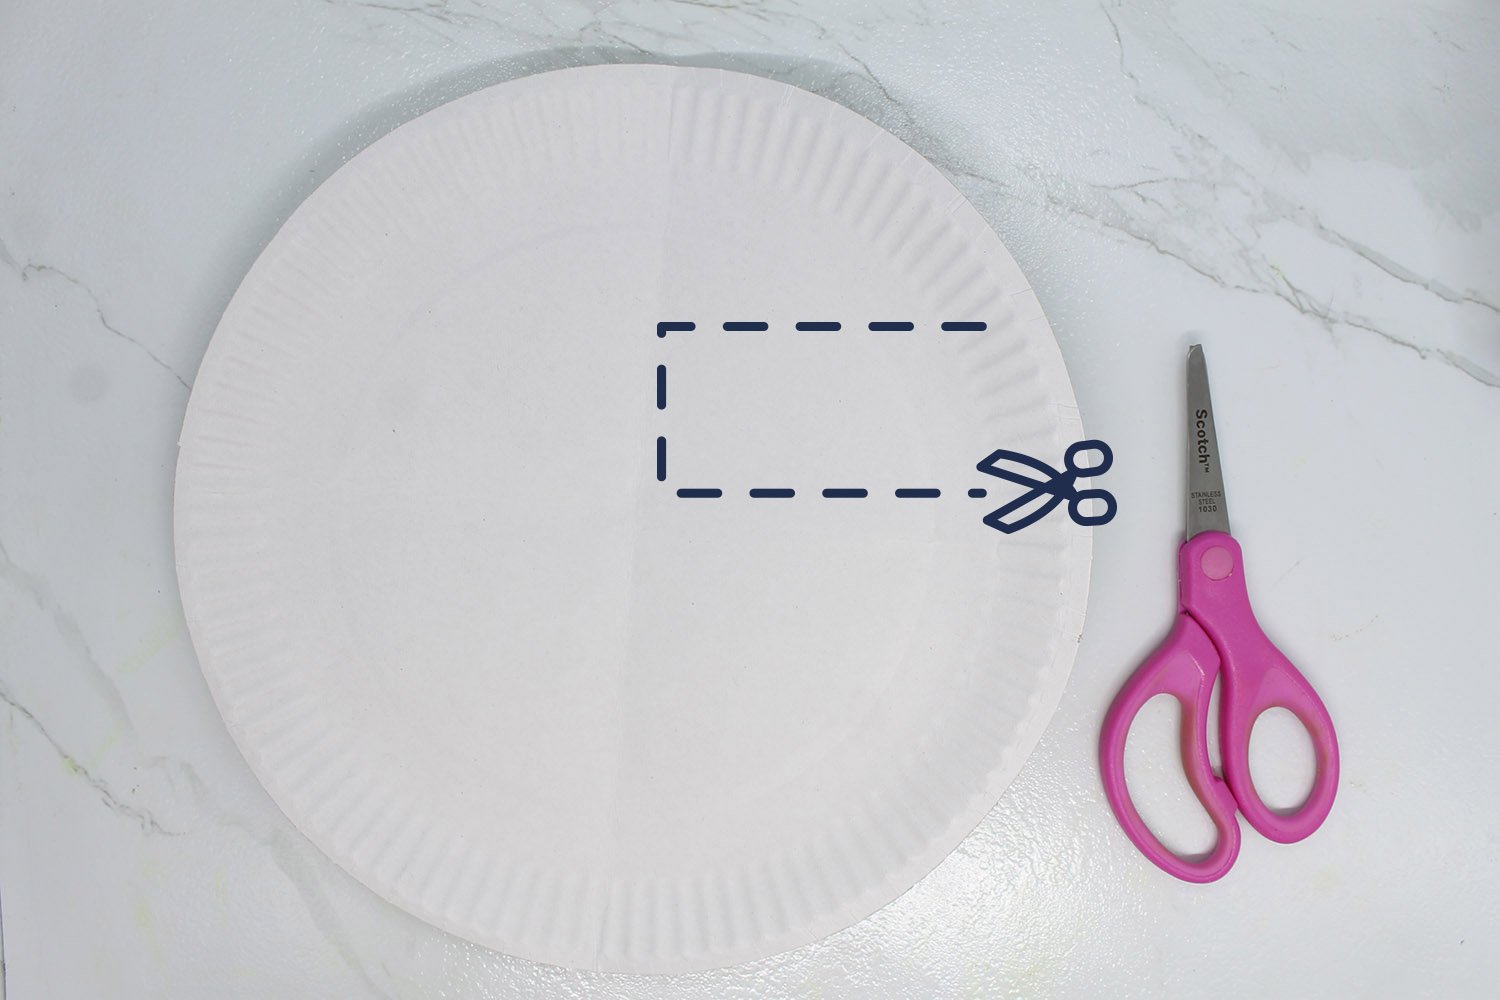 How to Make a Paper Plate Parrot - Step 02